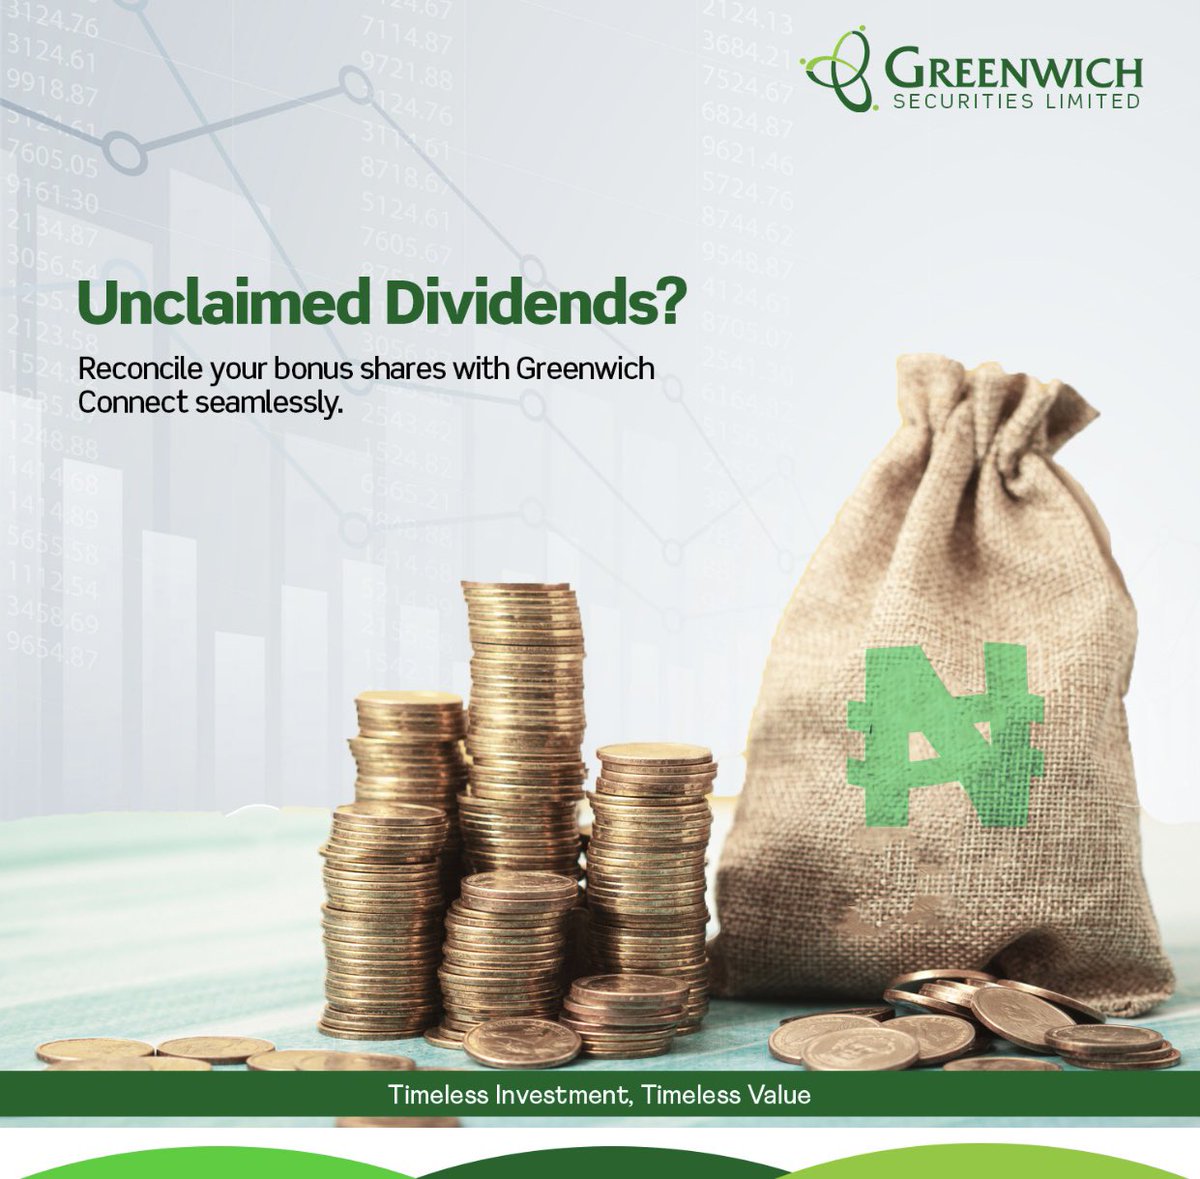 With Greenwich Connect, you can seamlessly move all your outstanding share certificates into your CSCS account.  

For more information, please call 01-6370000 or email customermandates@greenwichbankgroup.com.  

#GreenwichConnect #FinancialSolution